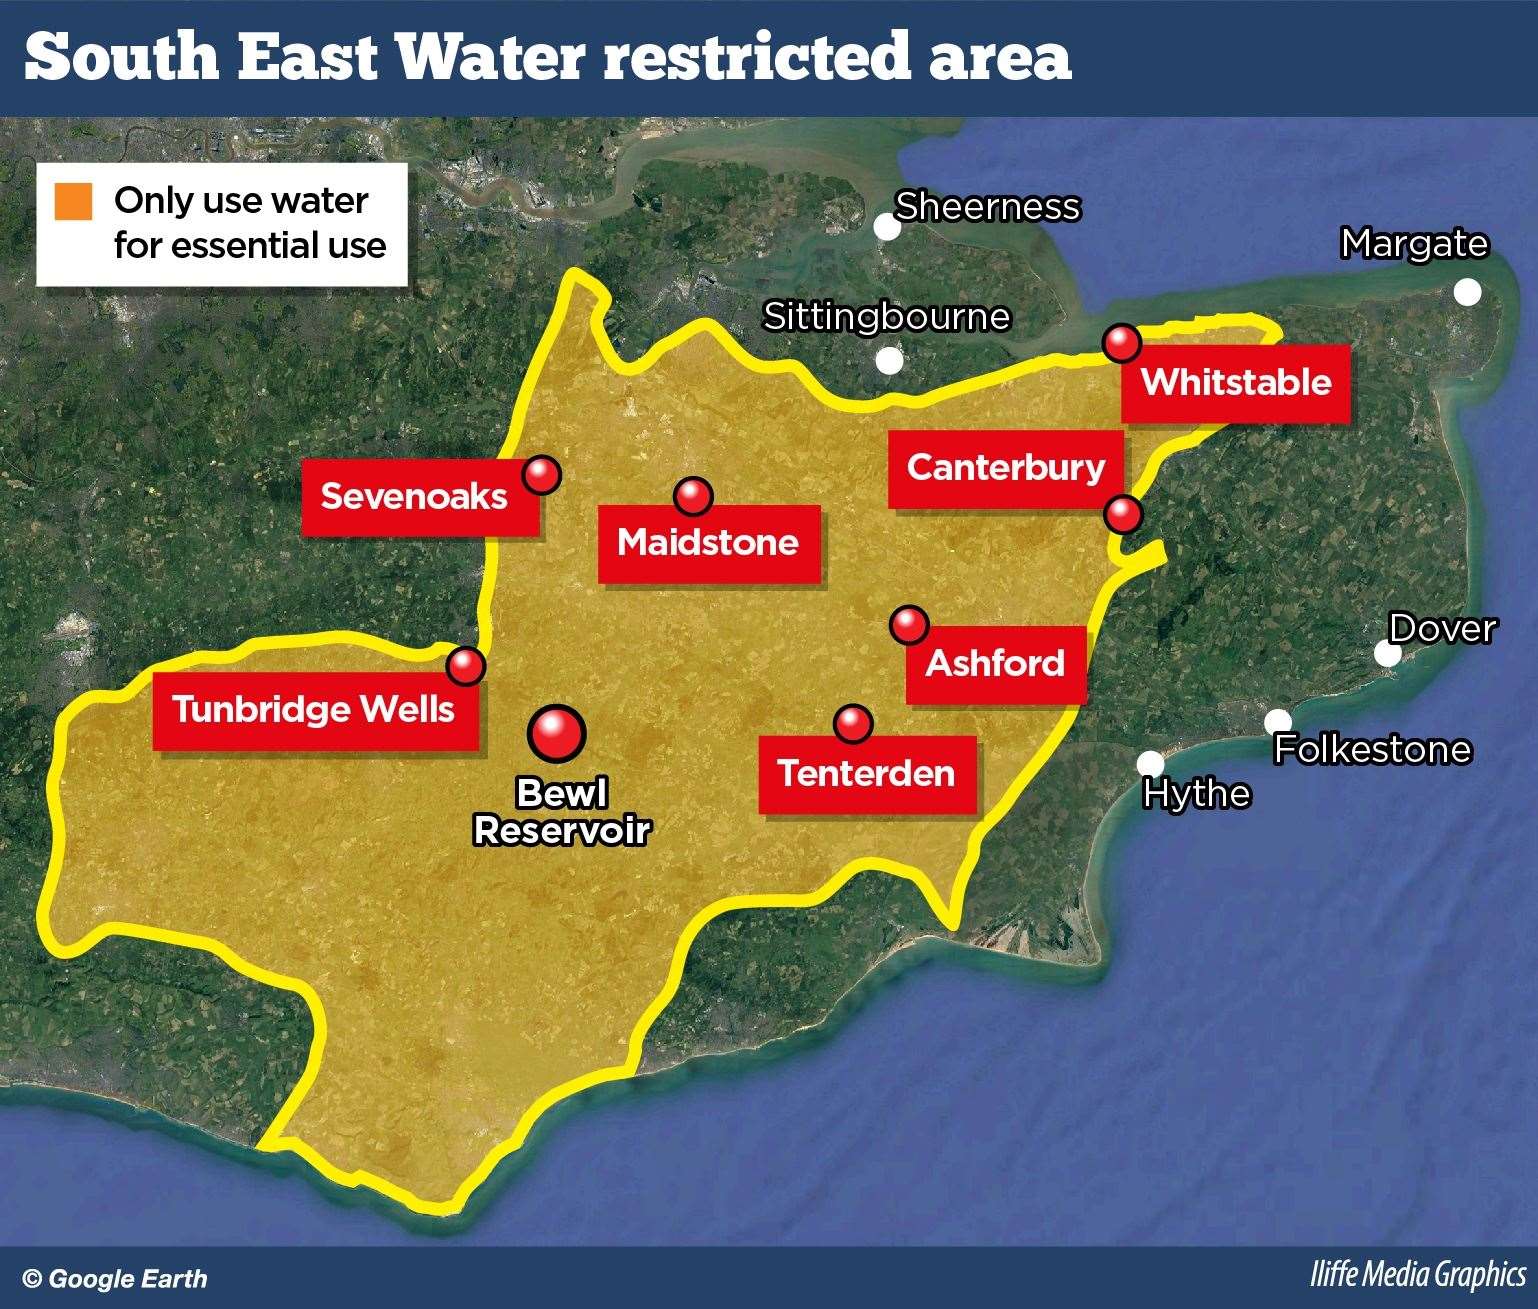 The parts of the south east where water restrictions were imposed